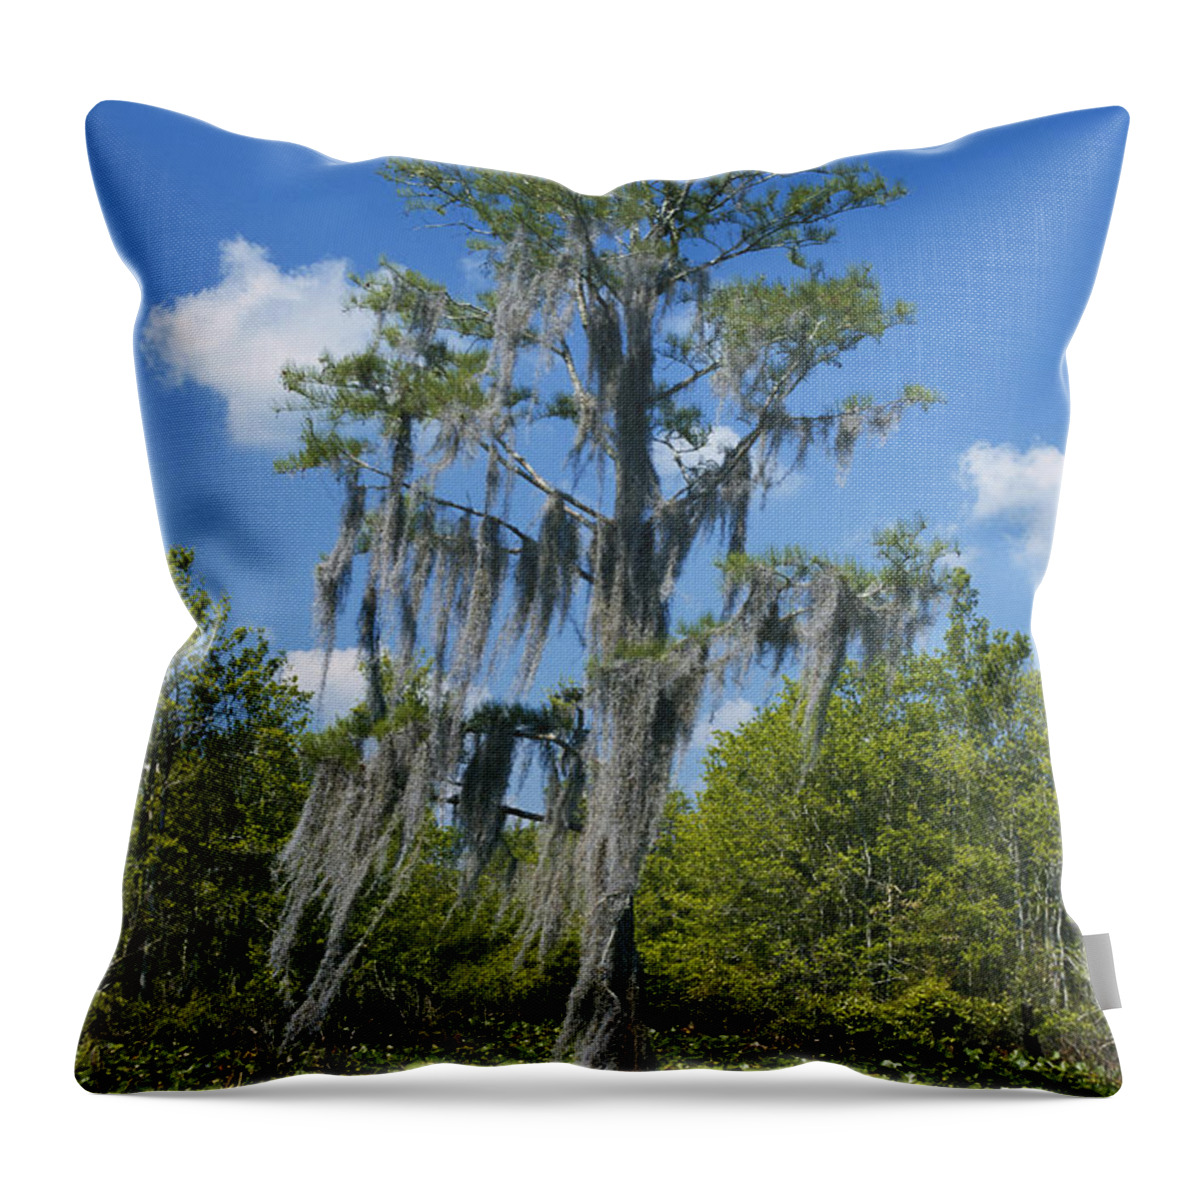 Air Plant Throw Pillow featuring the photograph Swamp Cypress In Okefenokee Nwr by C.r. Sharp